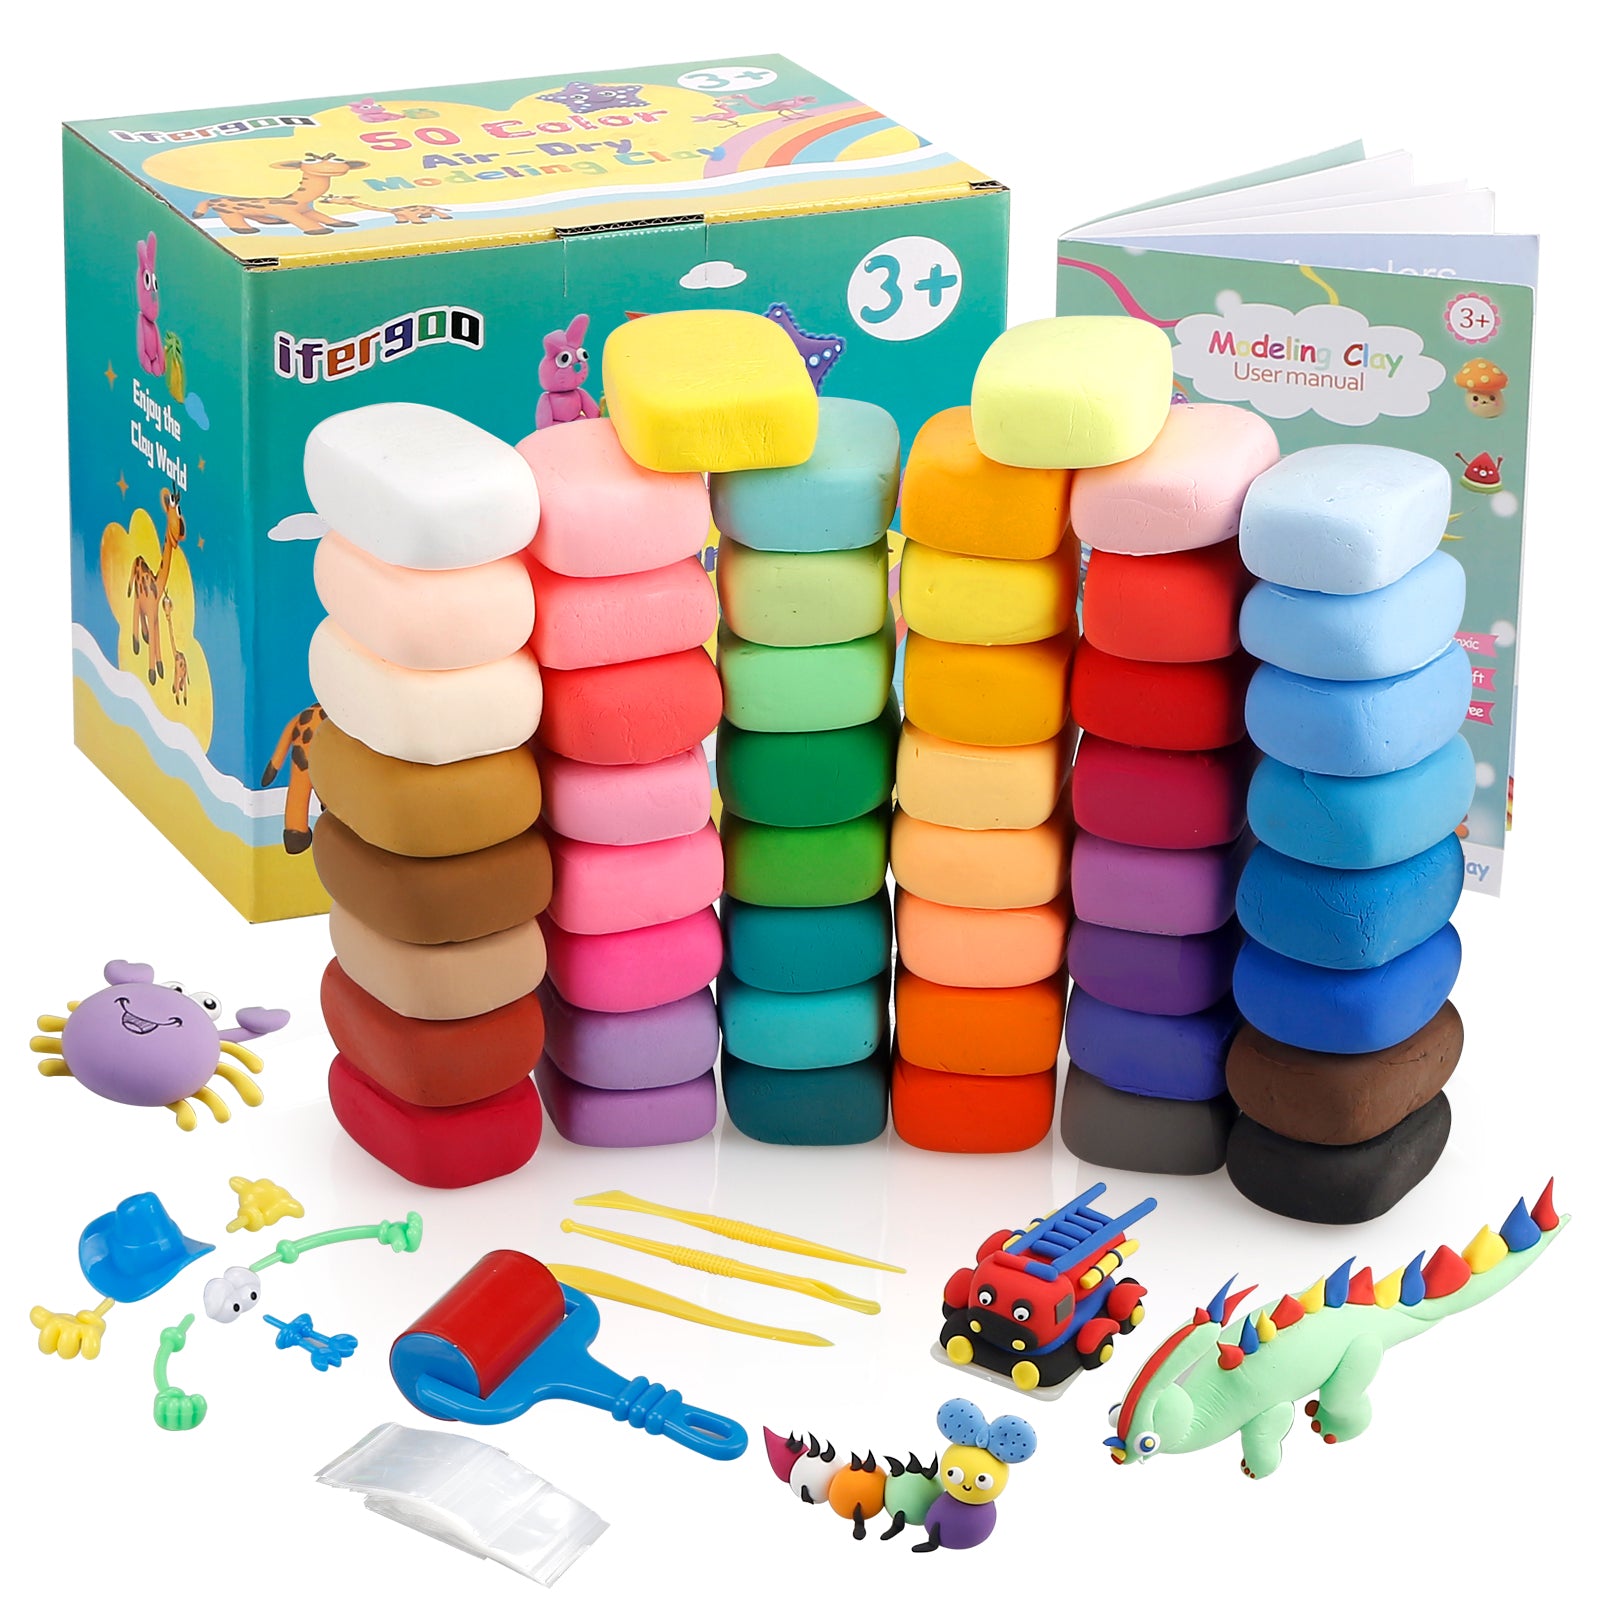 Modeling Clay - 48 Colors Air Dry Clay, DIY Molding Magic Clay for